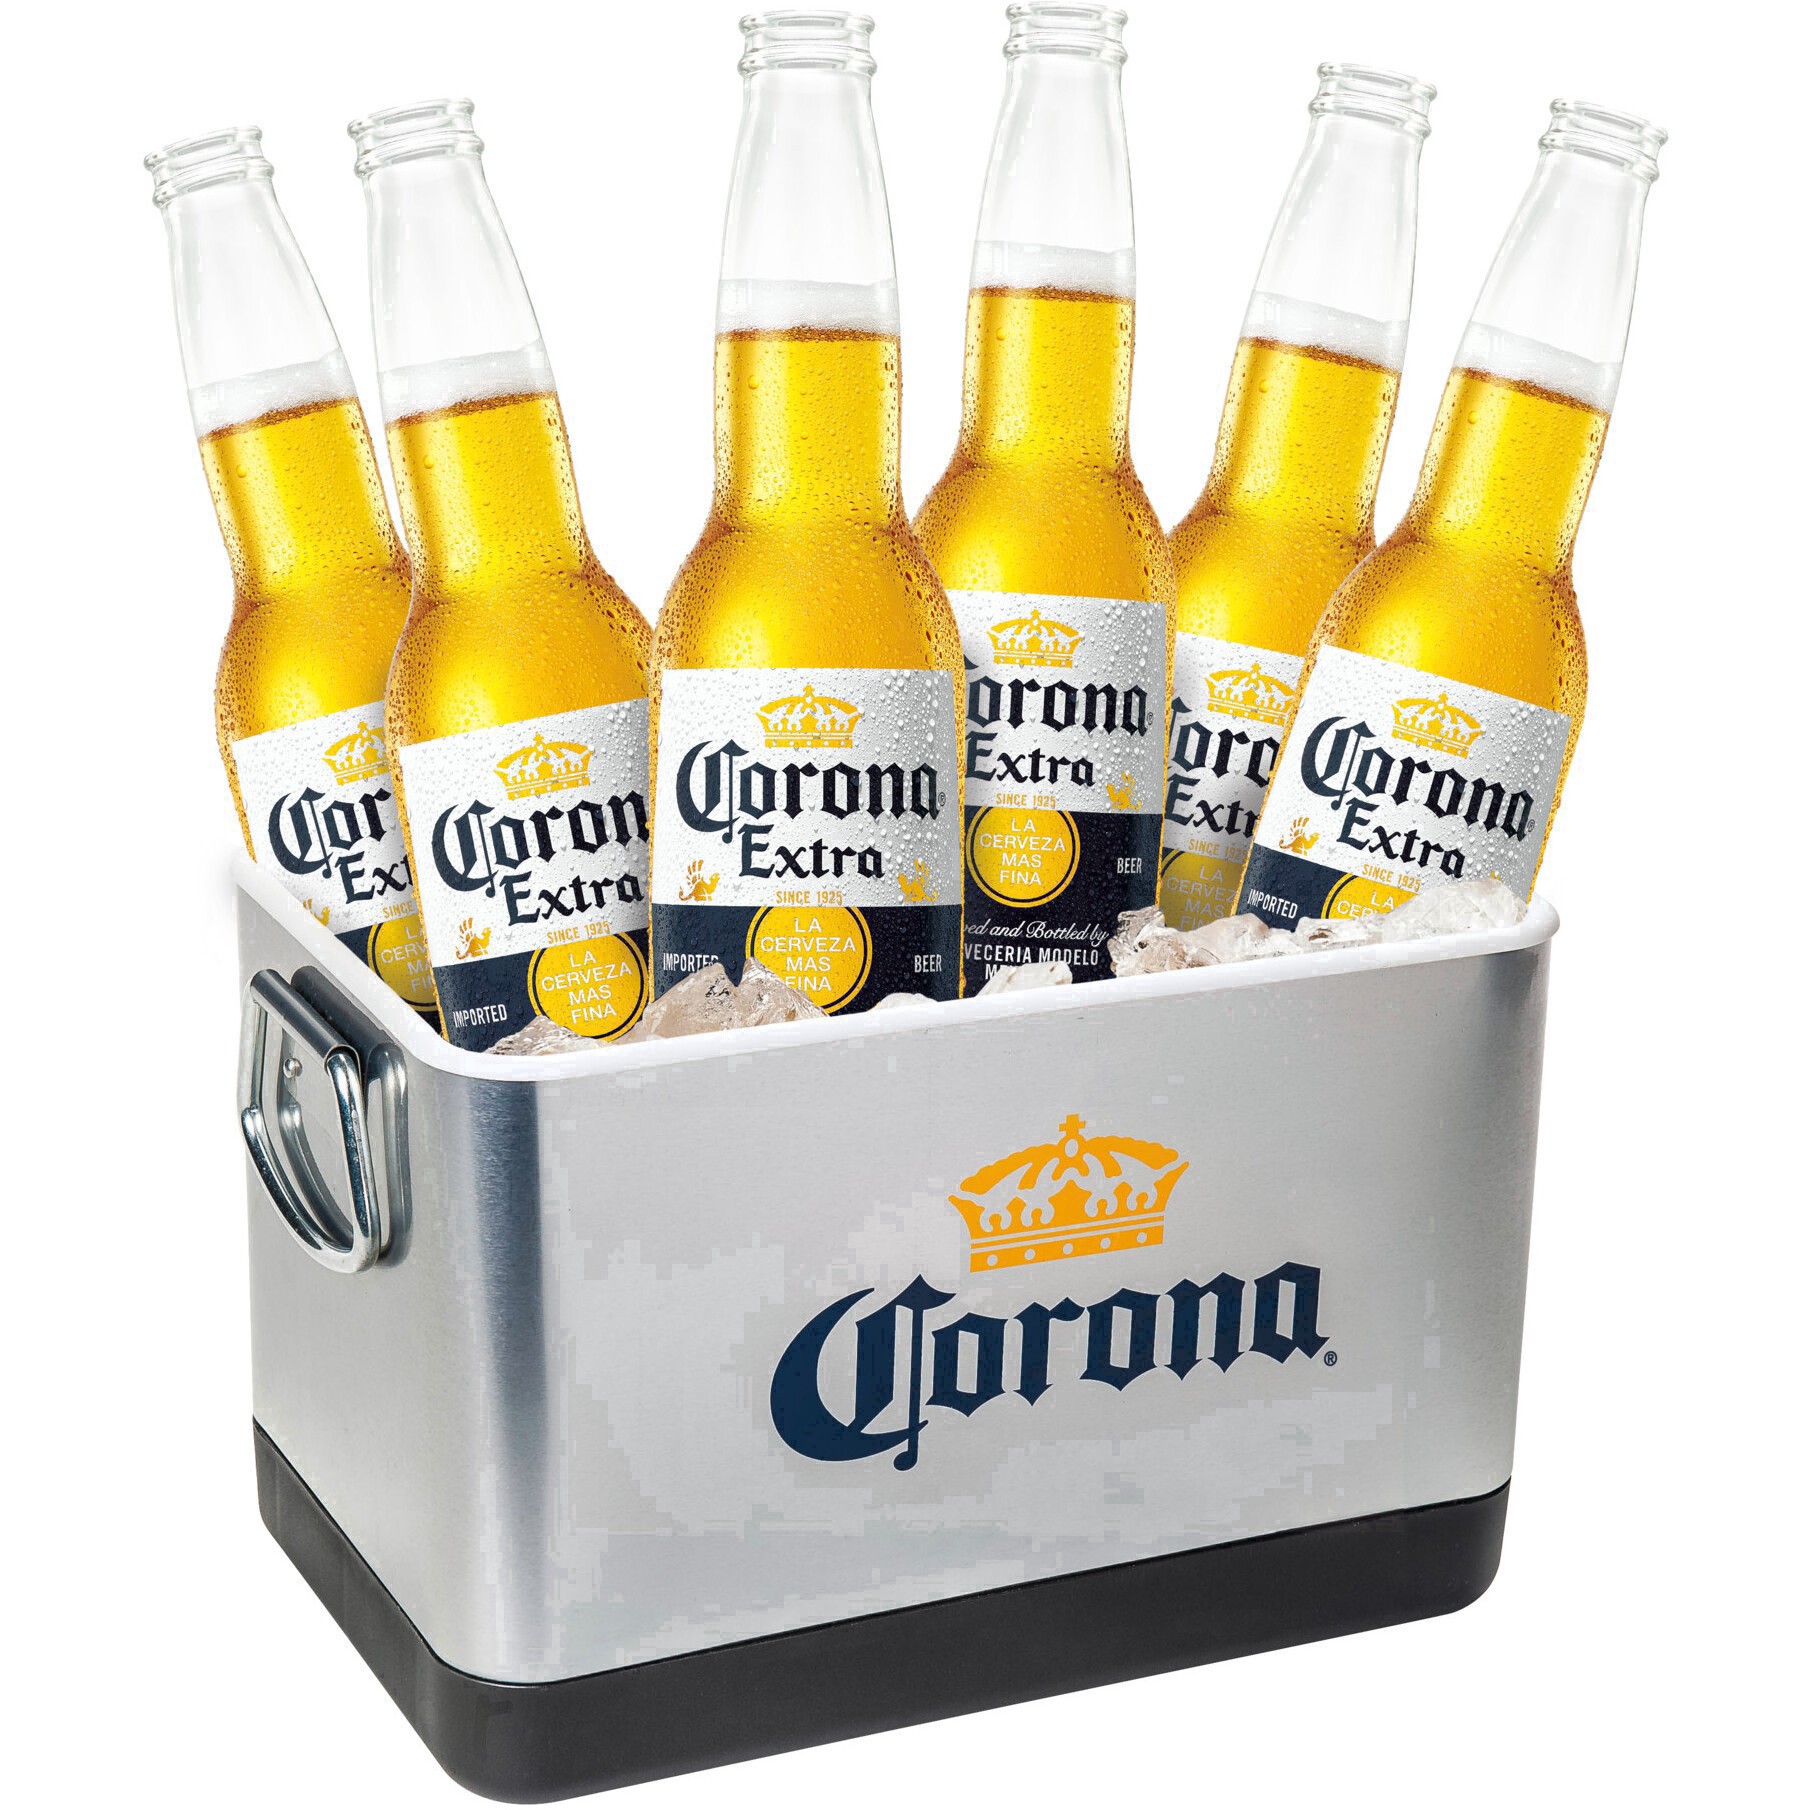 slide 15 of 98, Corona Extra Lager Mexican Beer Bottles, 12 oz